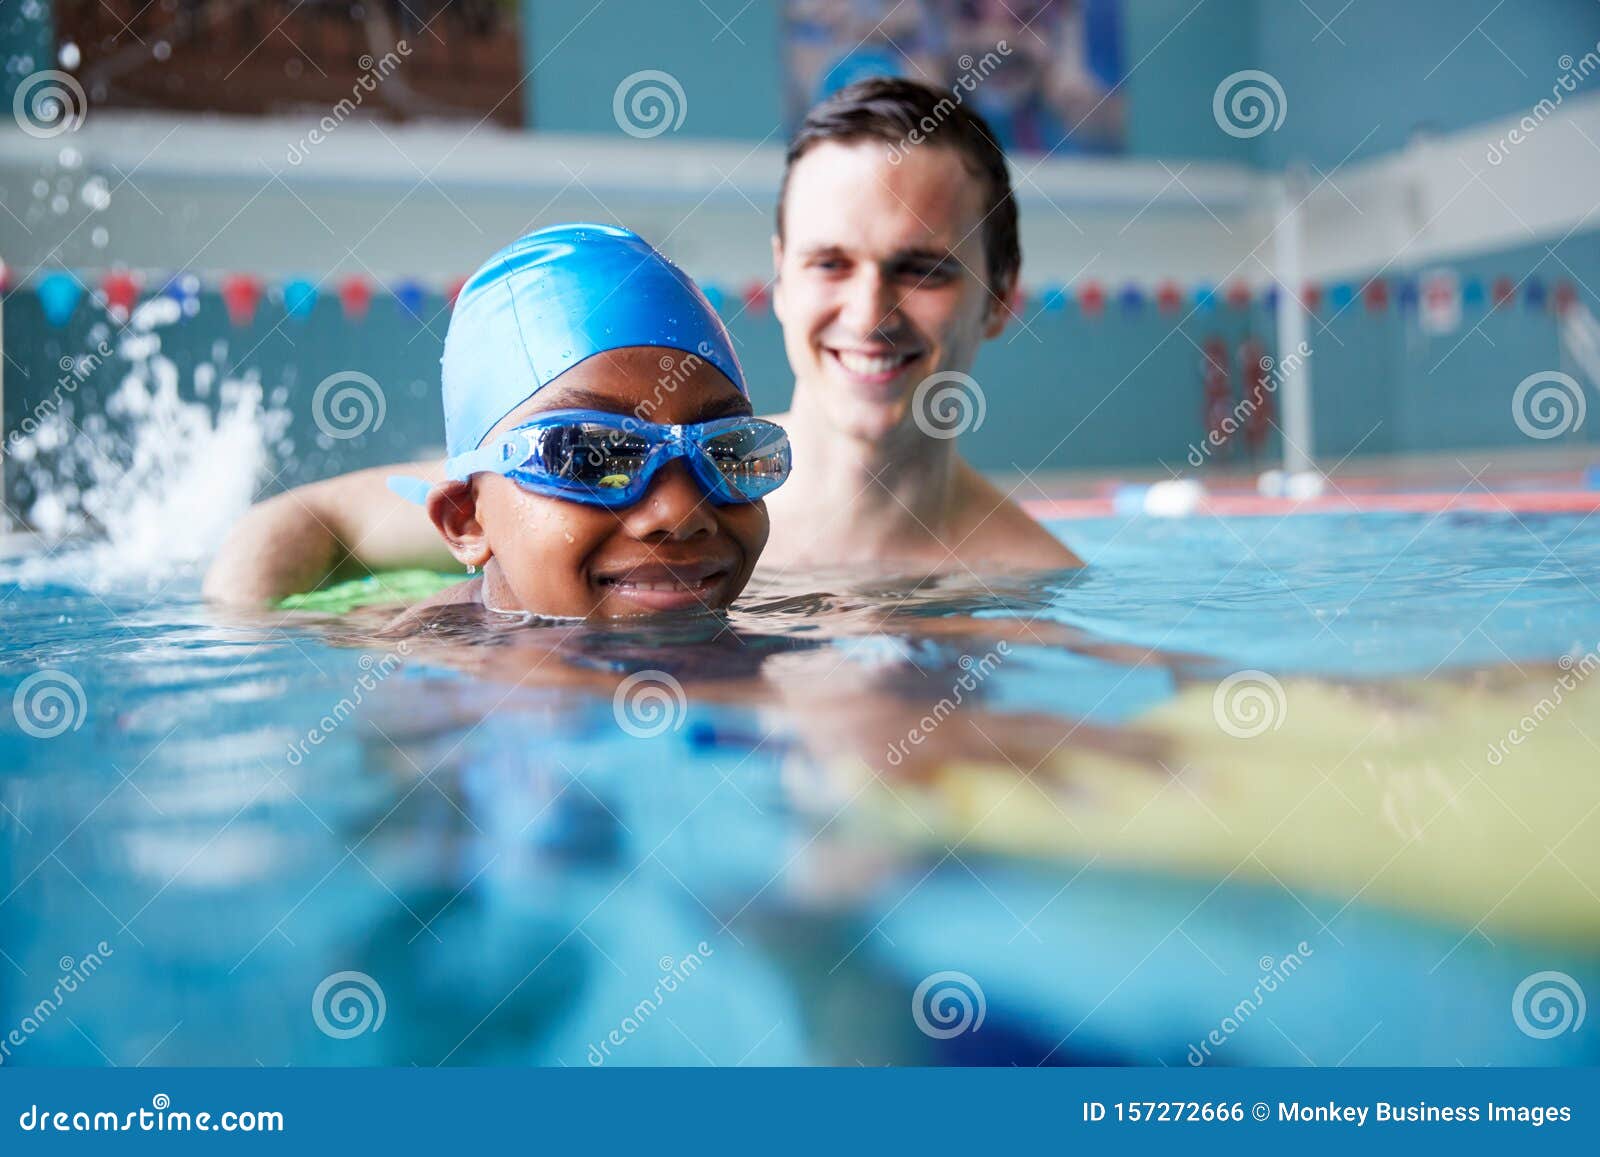 male swimming coach giving boy holding float one to one lesson in pool